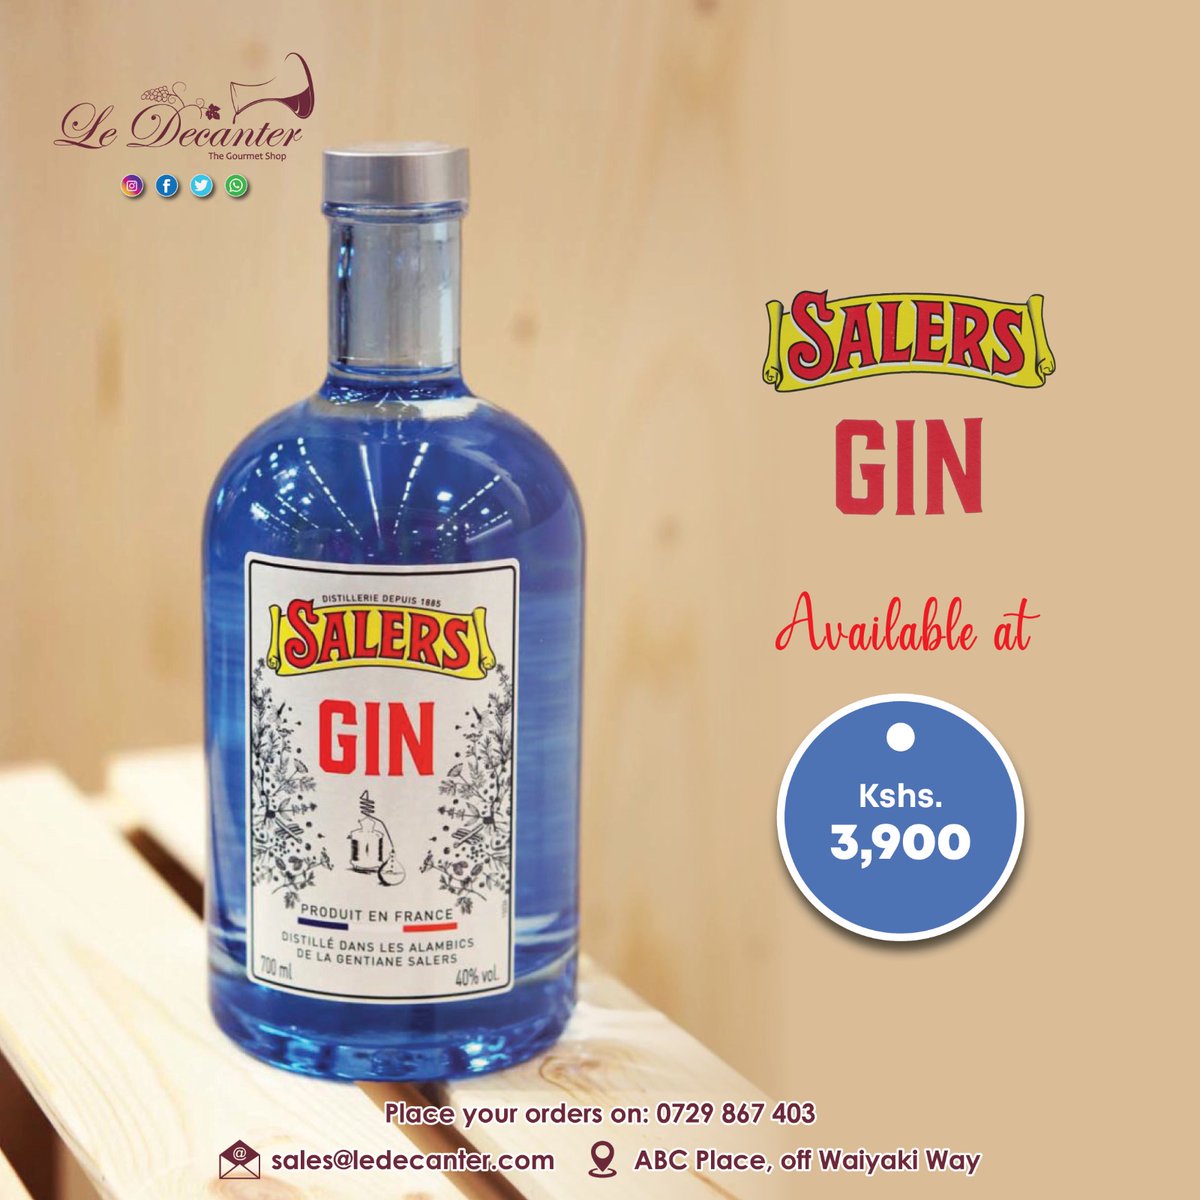 This amazing Gin is available at our shop for only 3,900/= On the nose it is Intense with notes of citrus and cardamom enhanced by notes of juniper. It has a Spicy finish of pepper, ginger and gentian. Email us on sales@ledecanter.com #ledecanter #ledecanterspirits